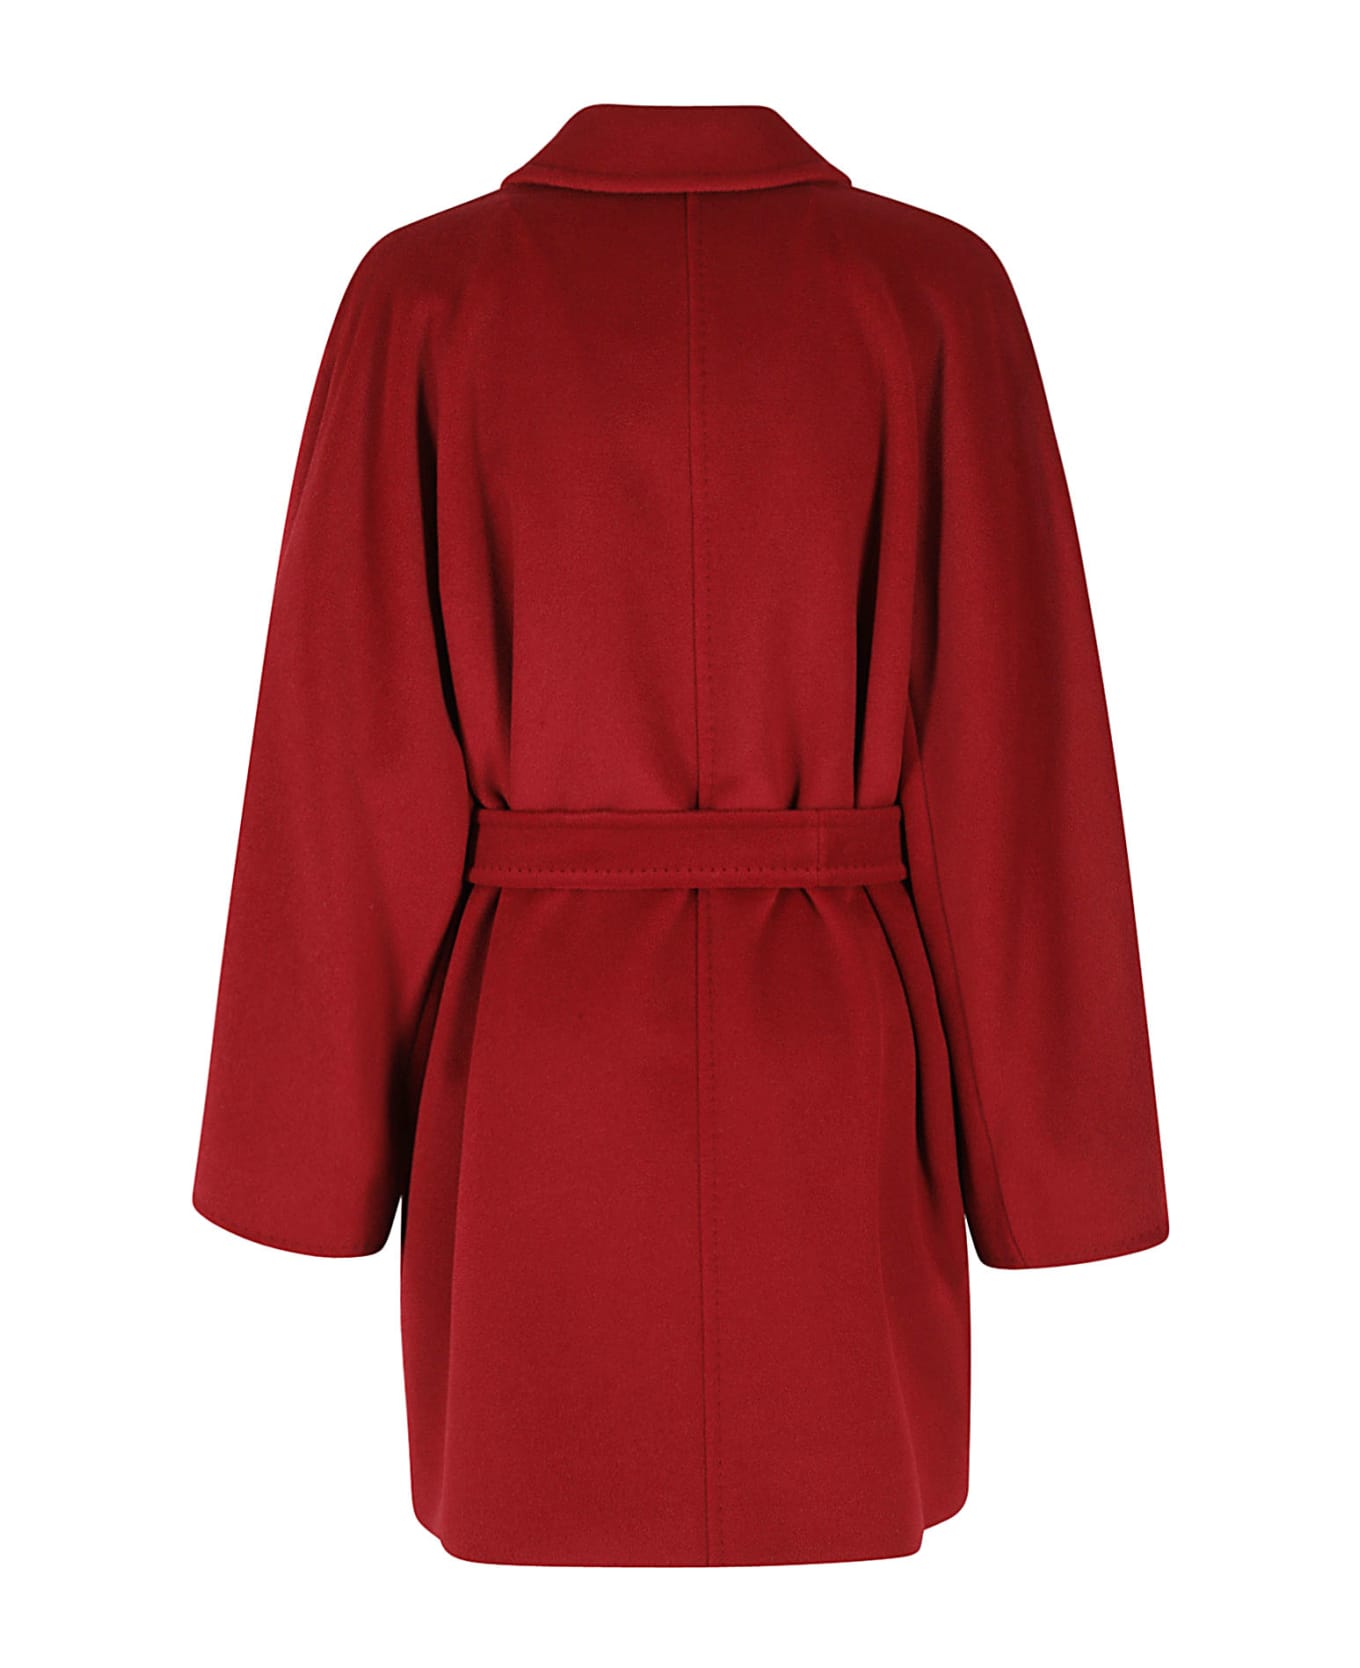 Max Mara Double-breasted Belted Coat - Rosso コート